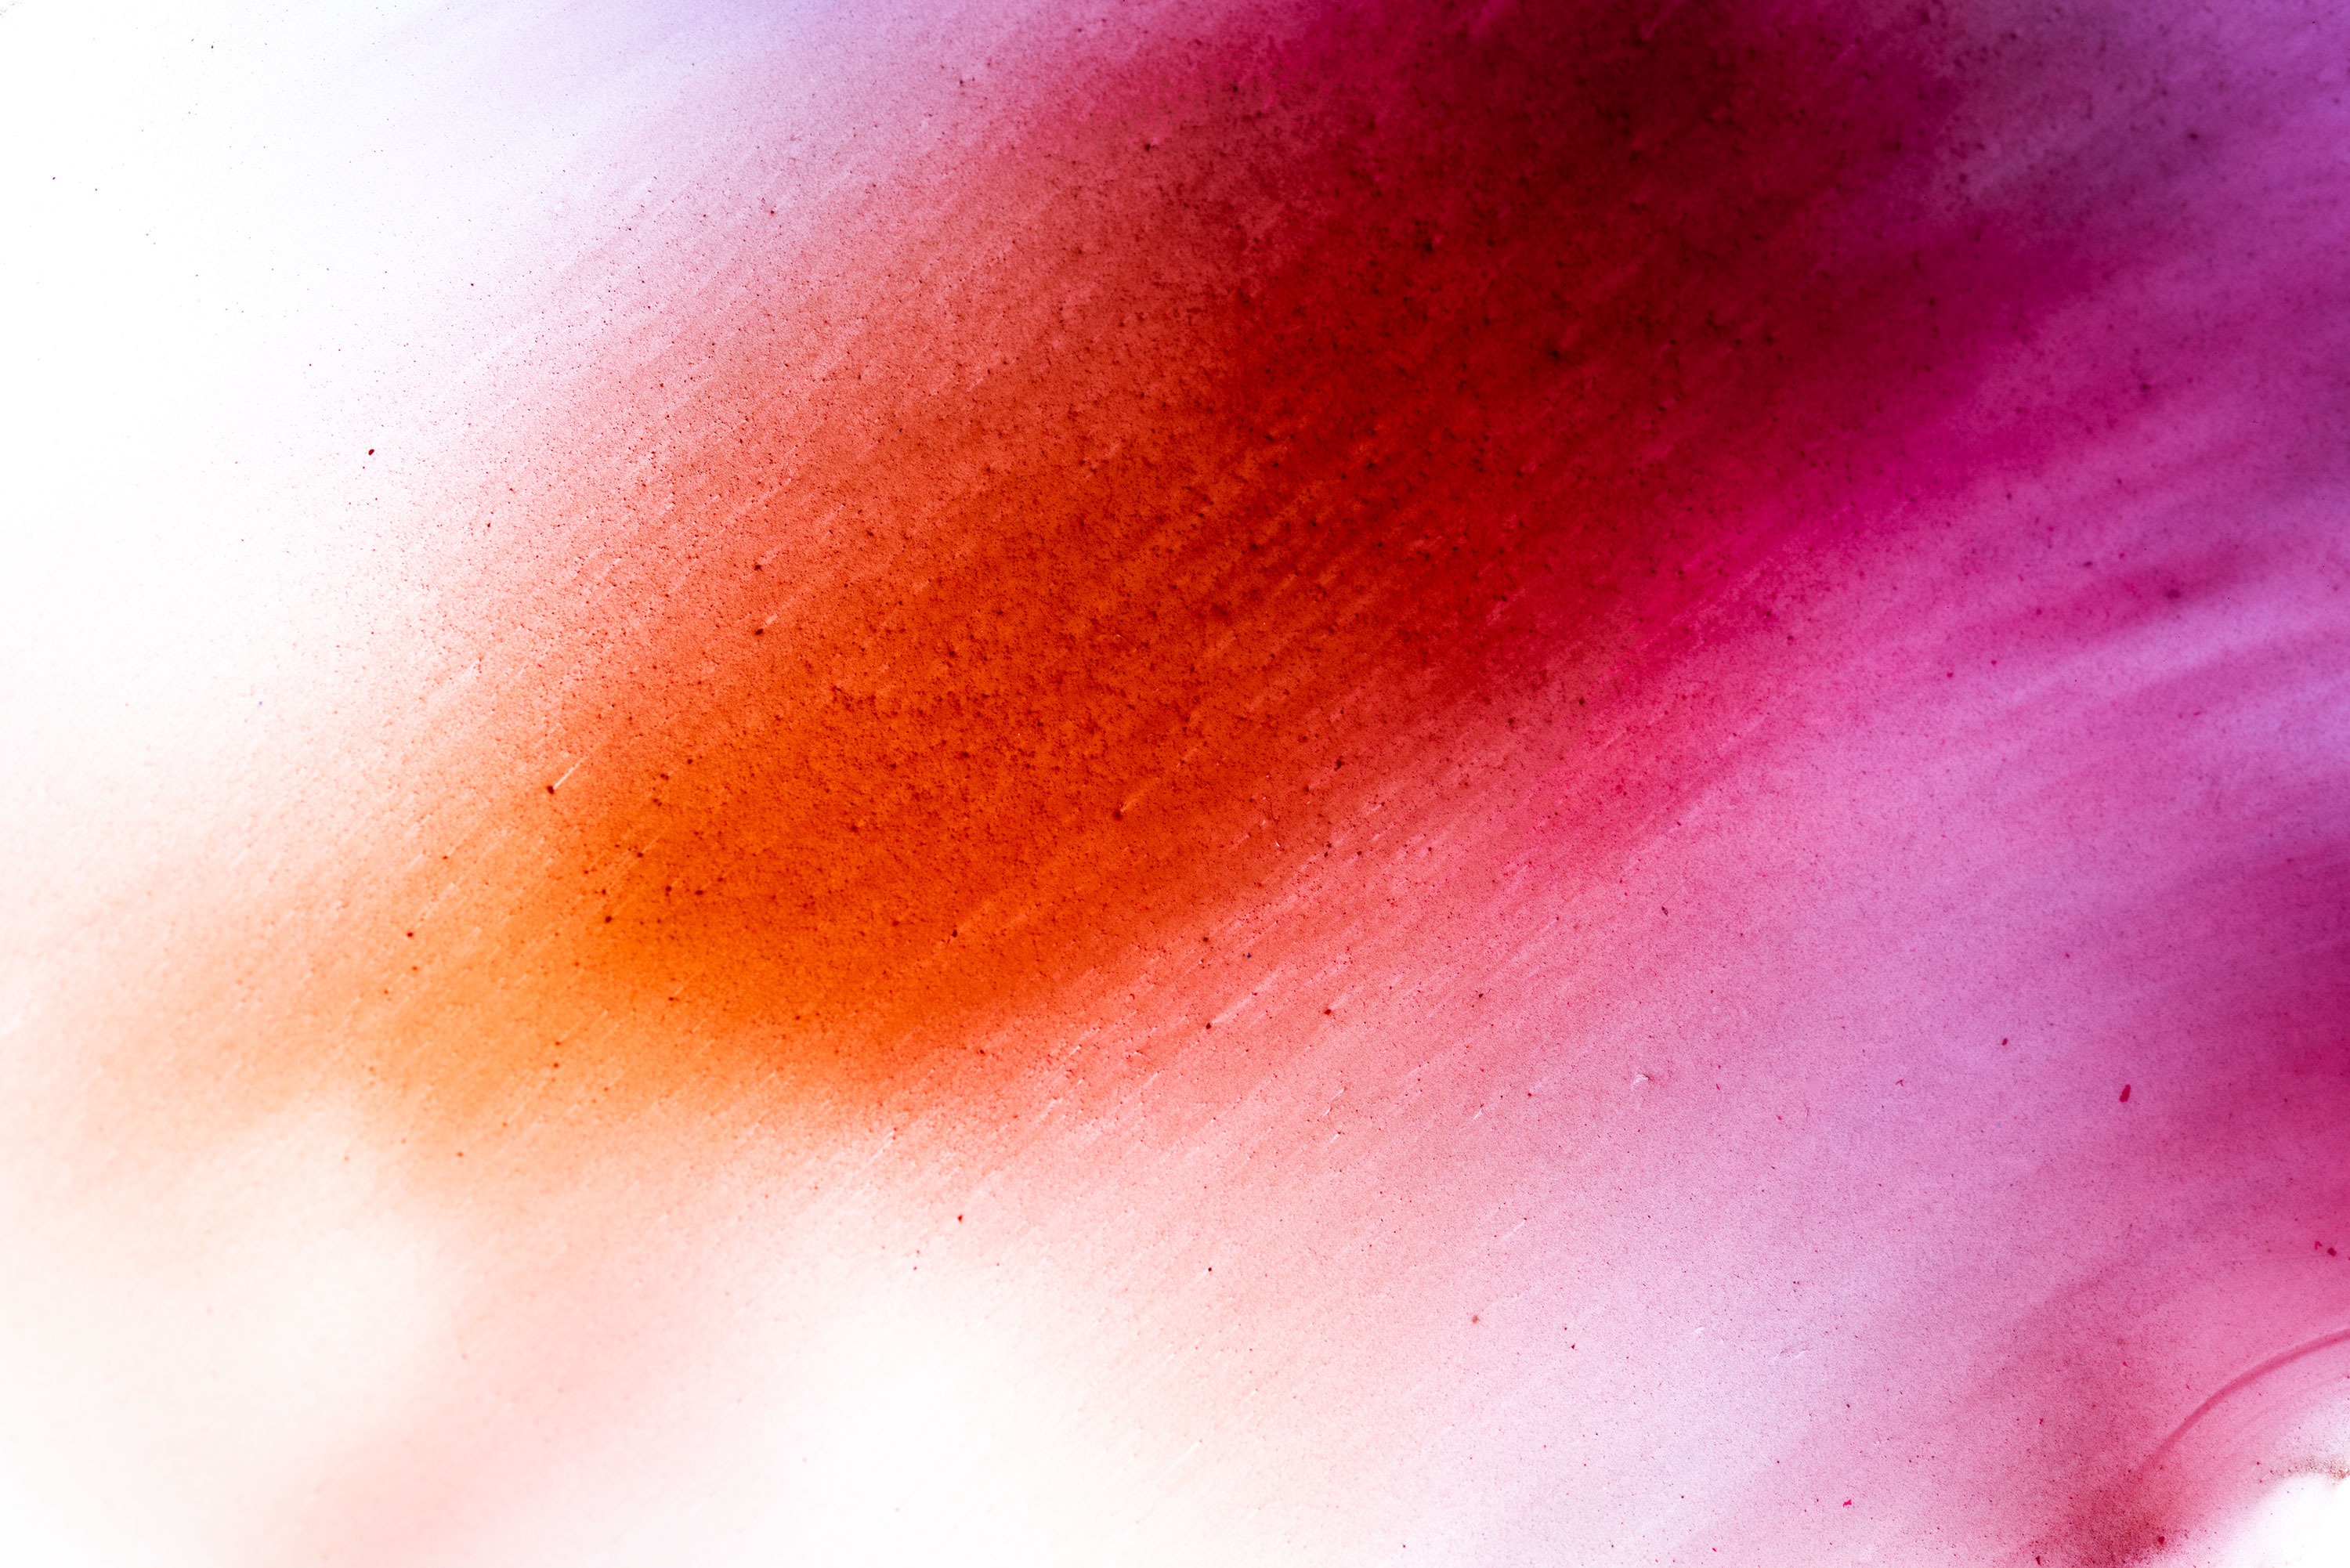 Abstract photography made of orange and pink watercolour. Image by Jennifer Esseiva.